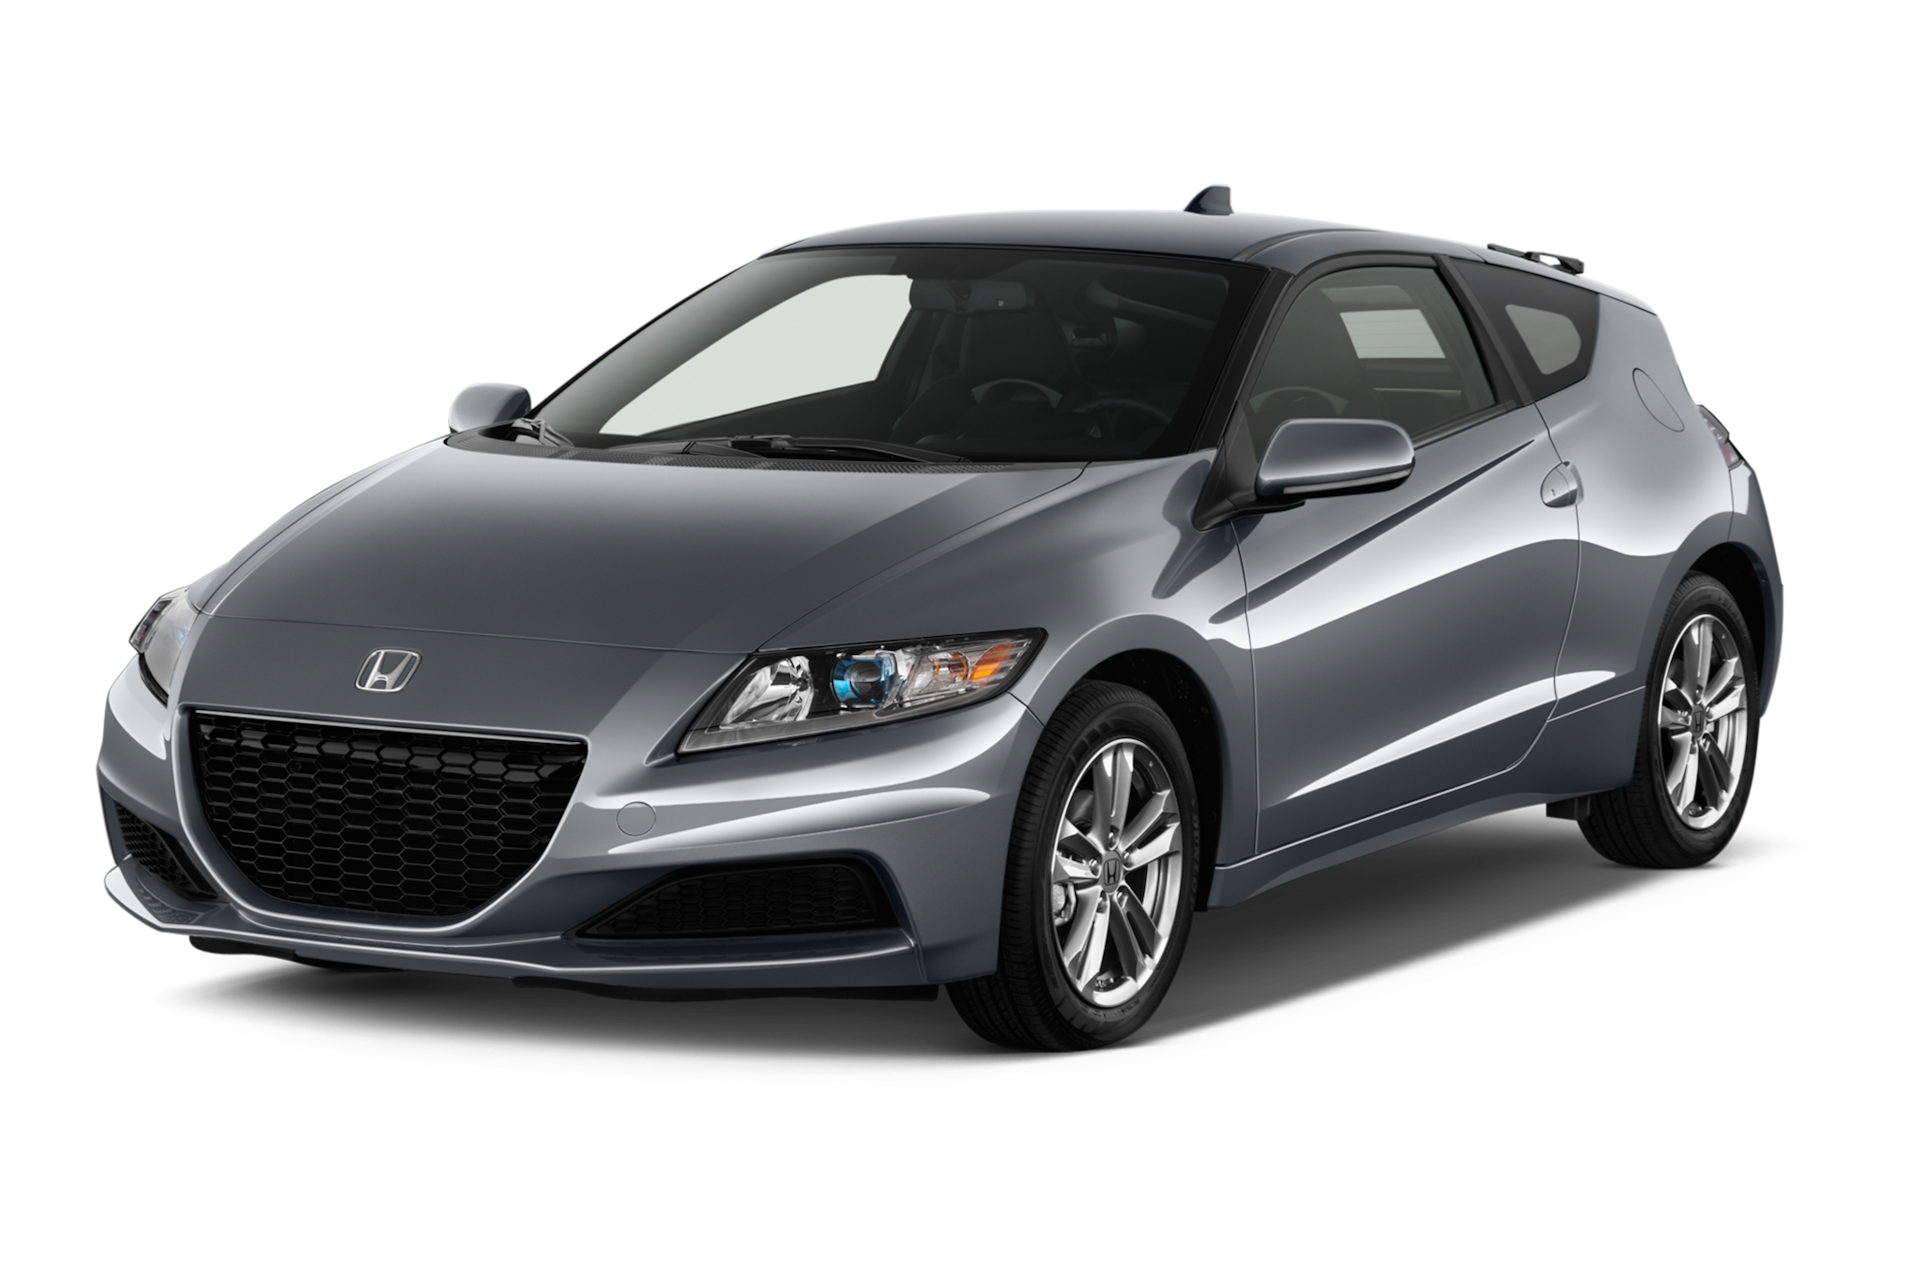 2013 Honda CR-Z Prices, Reviews, and Photos - MotorTrend